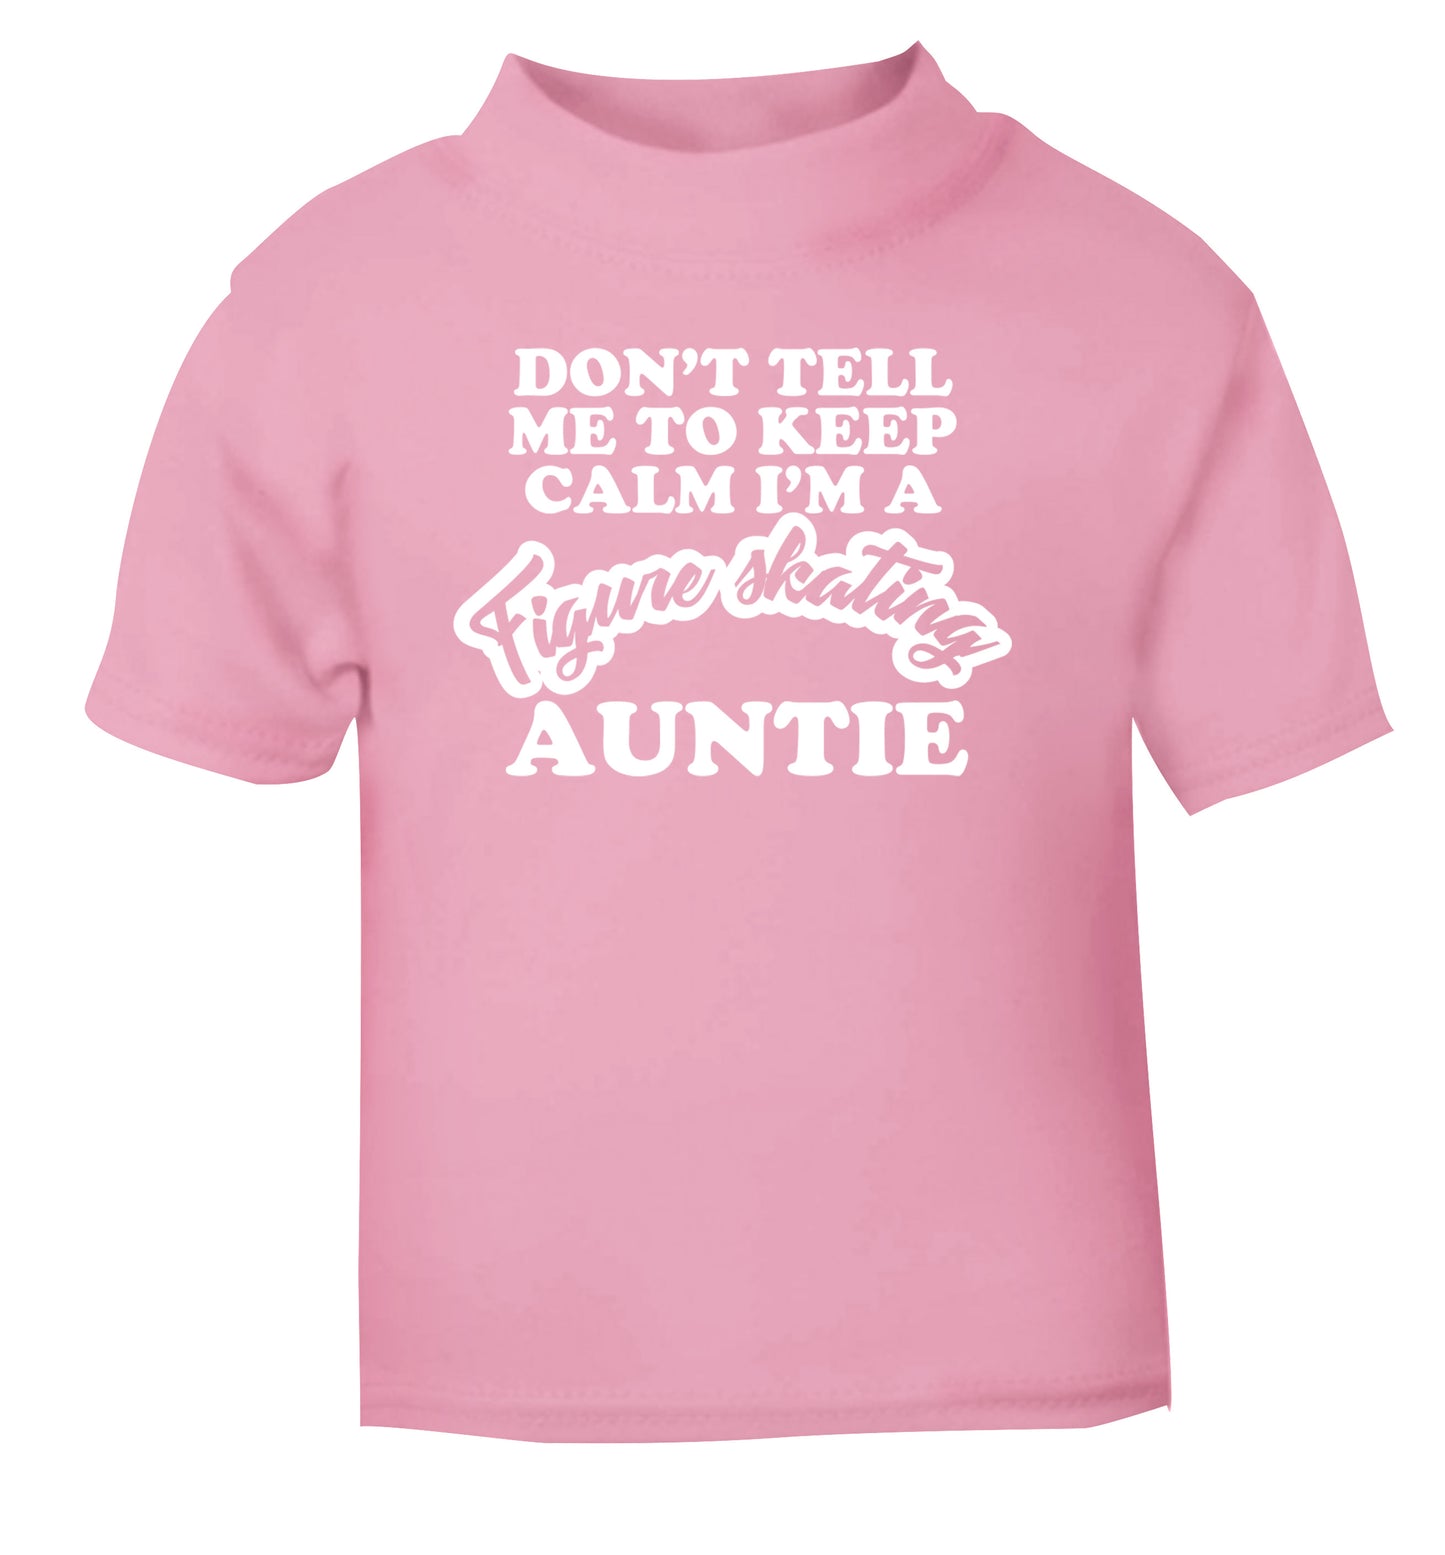 Don't tell me to keep calm I'm a figure skating auntie light pink Baby Toddler Tshirt 2 Years